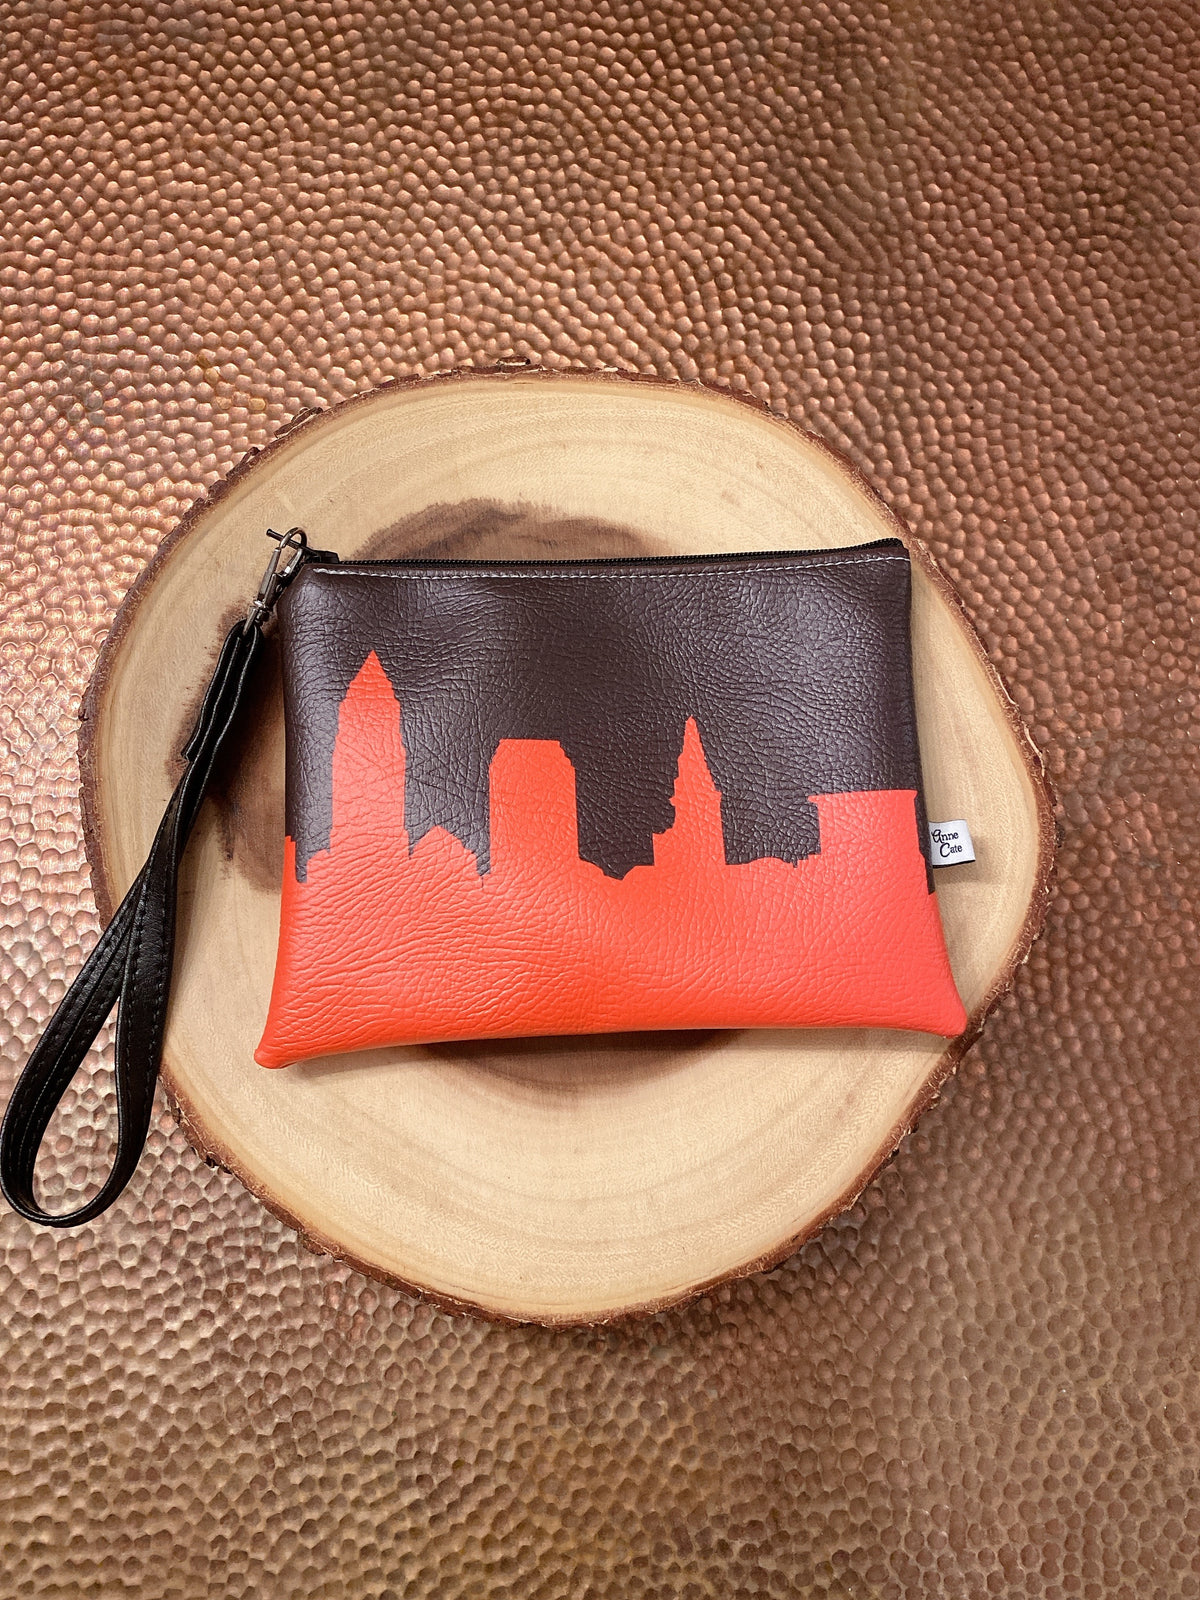 Anne Cate Browns Cleveland Skyline bag